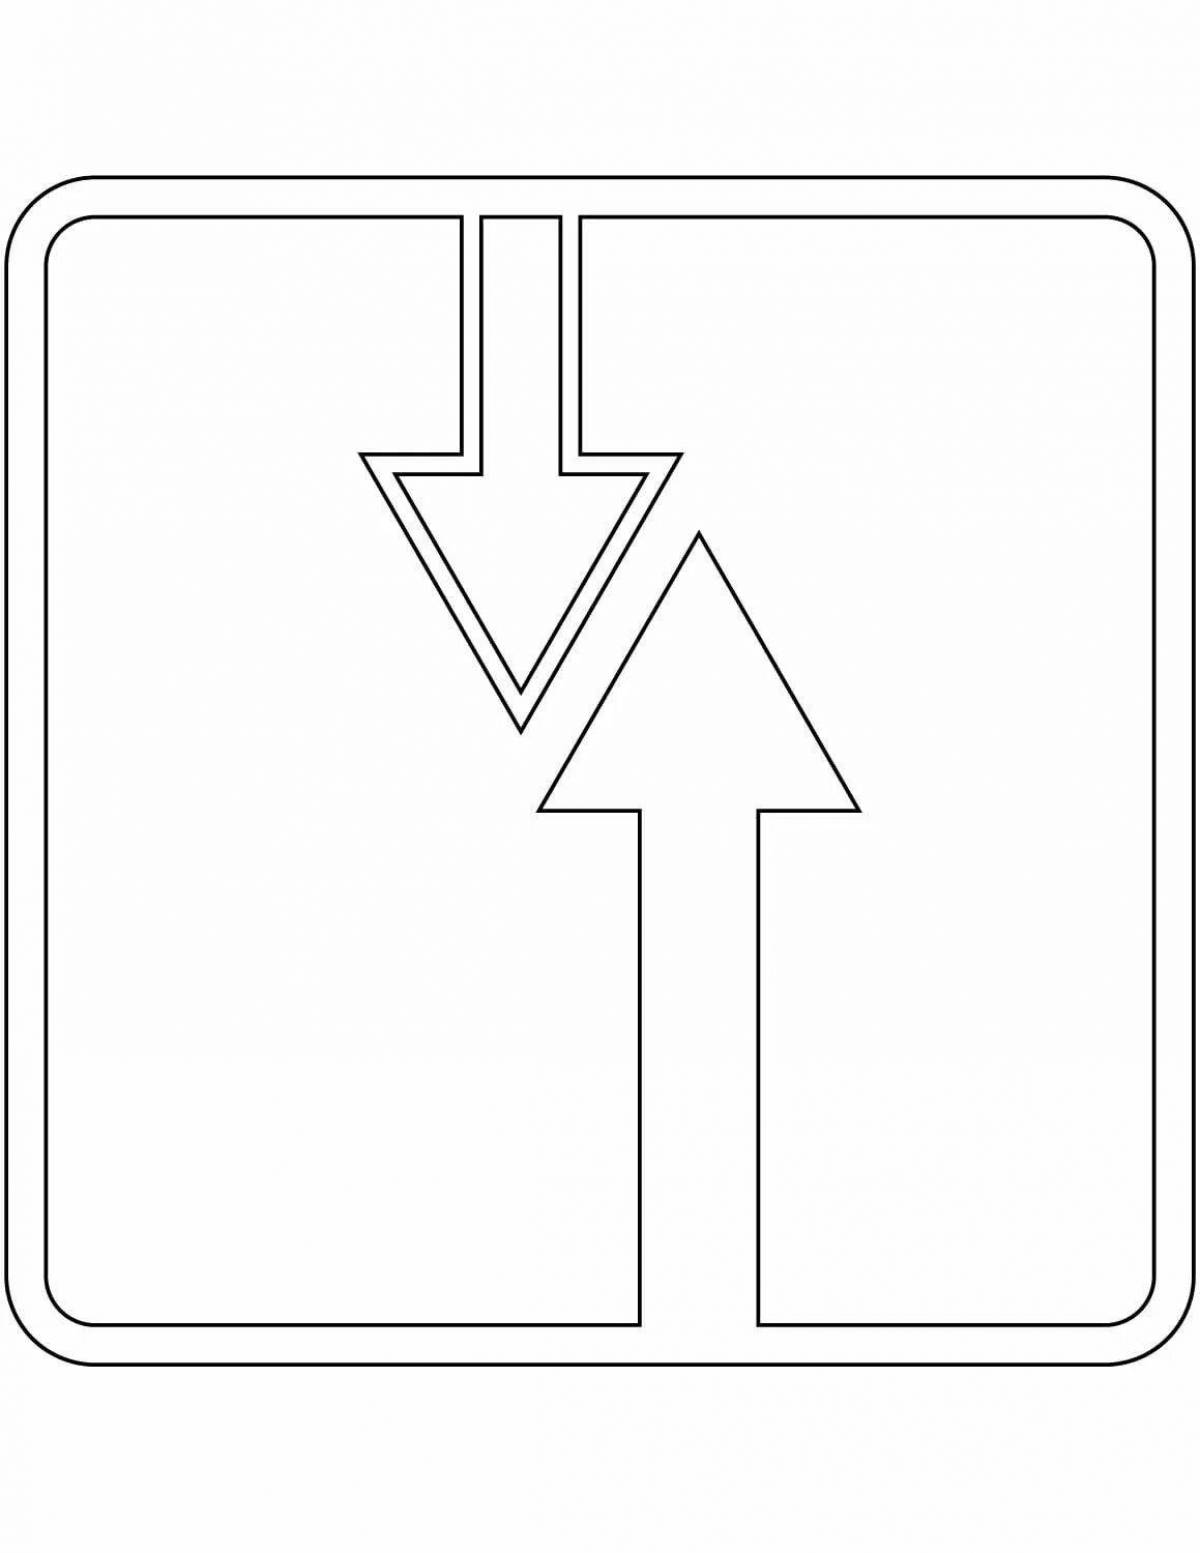 Coloring page cheerful main road sign